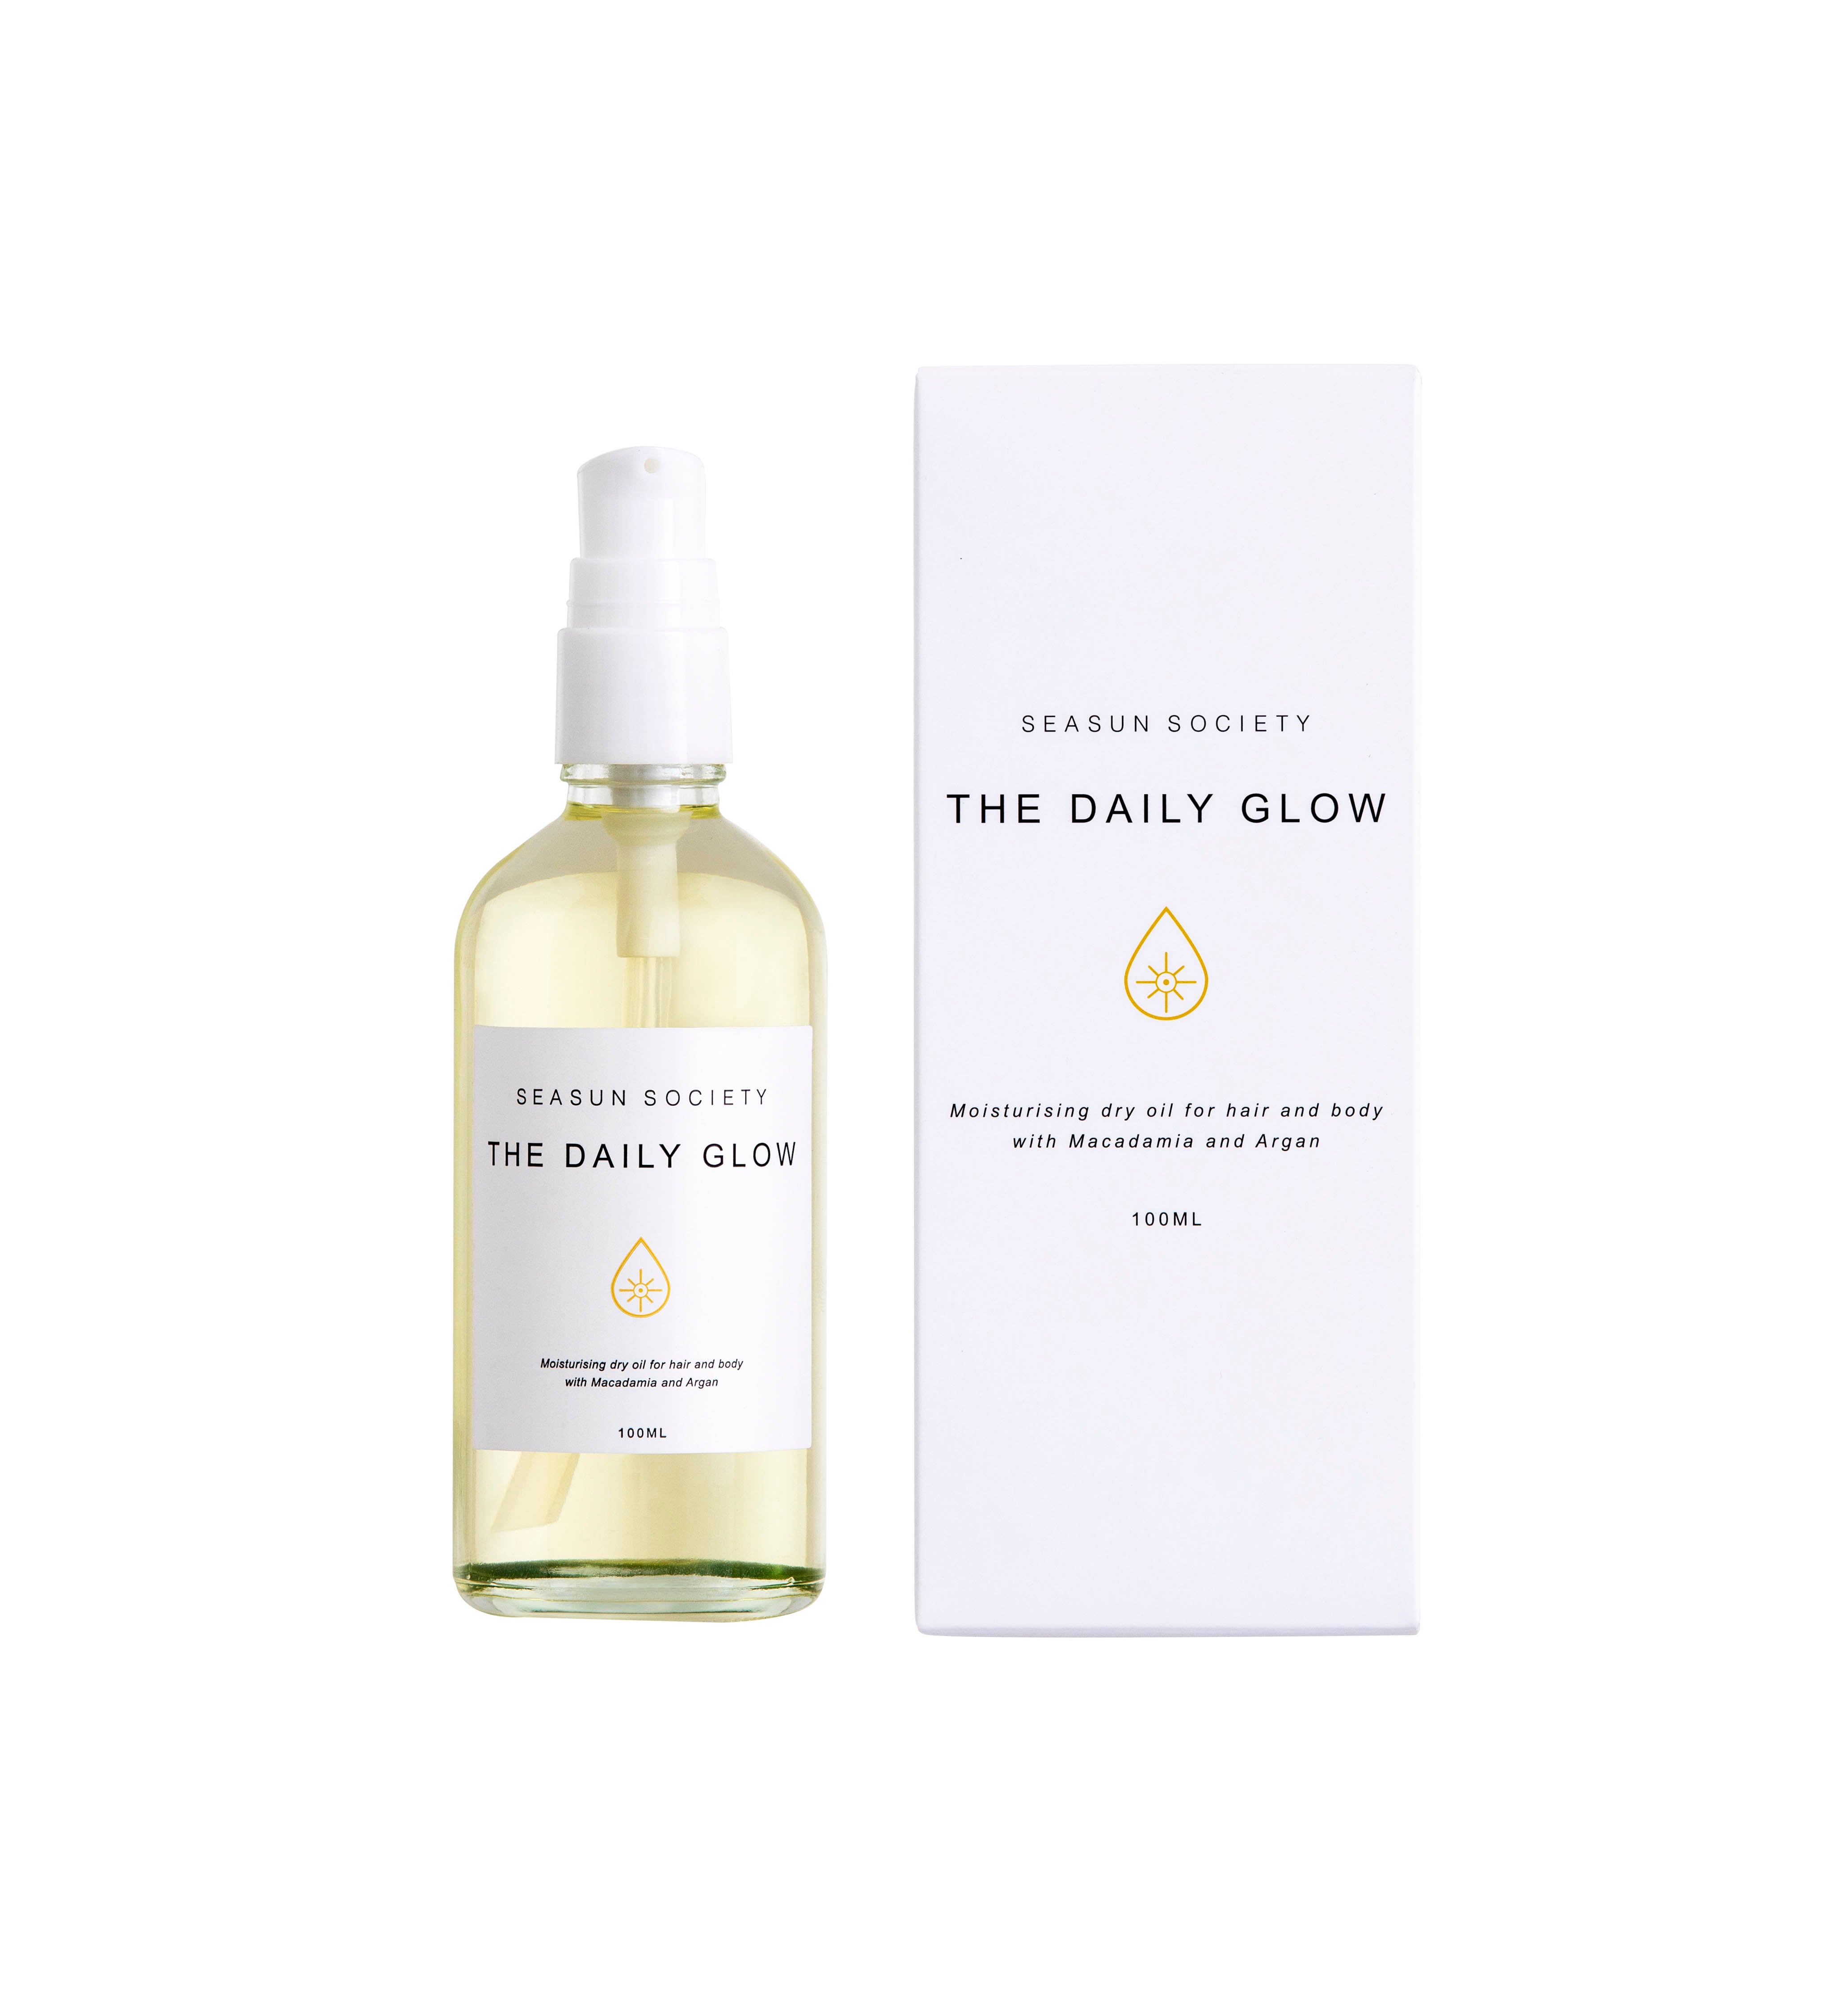 Clean Plant Based Beauty The Daily Glow Moisturising Dry Oil for Hair and Body By Seasun Society